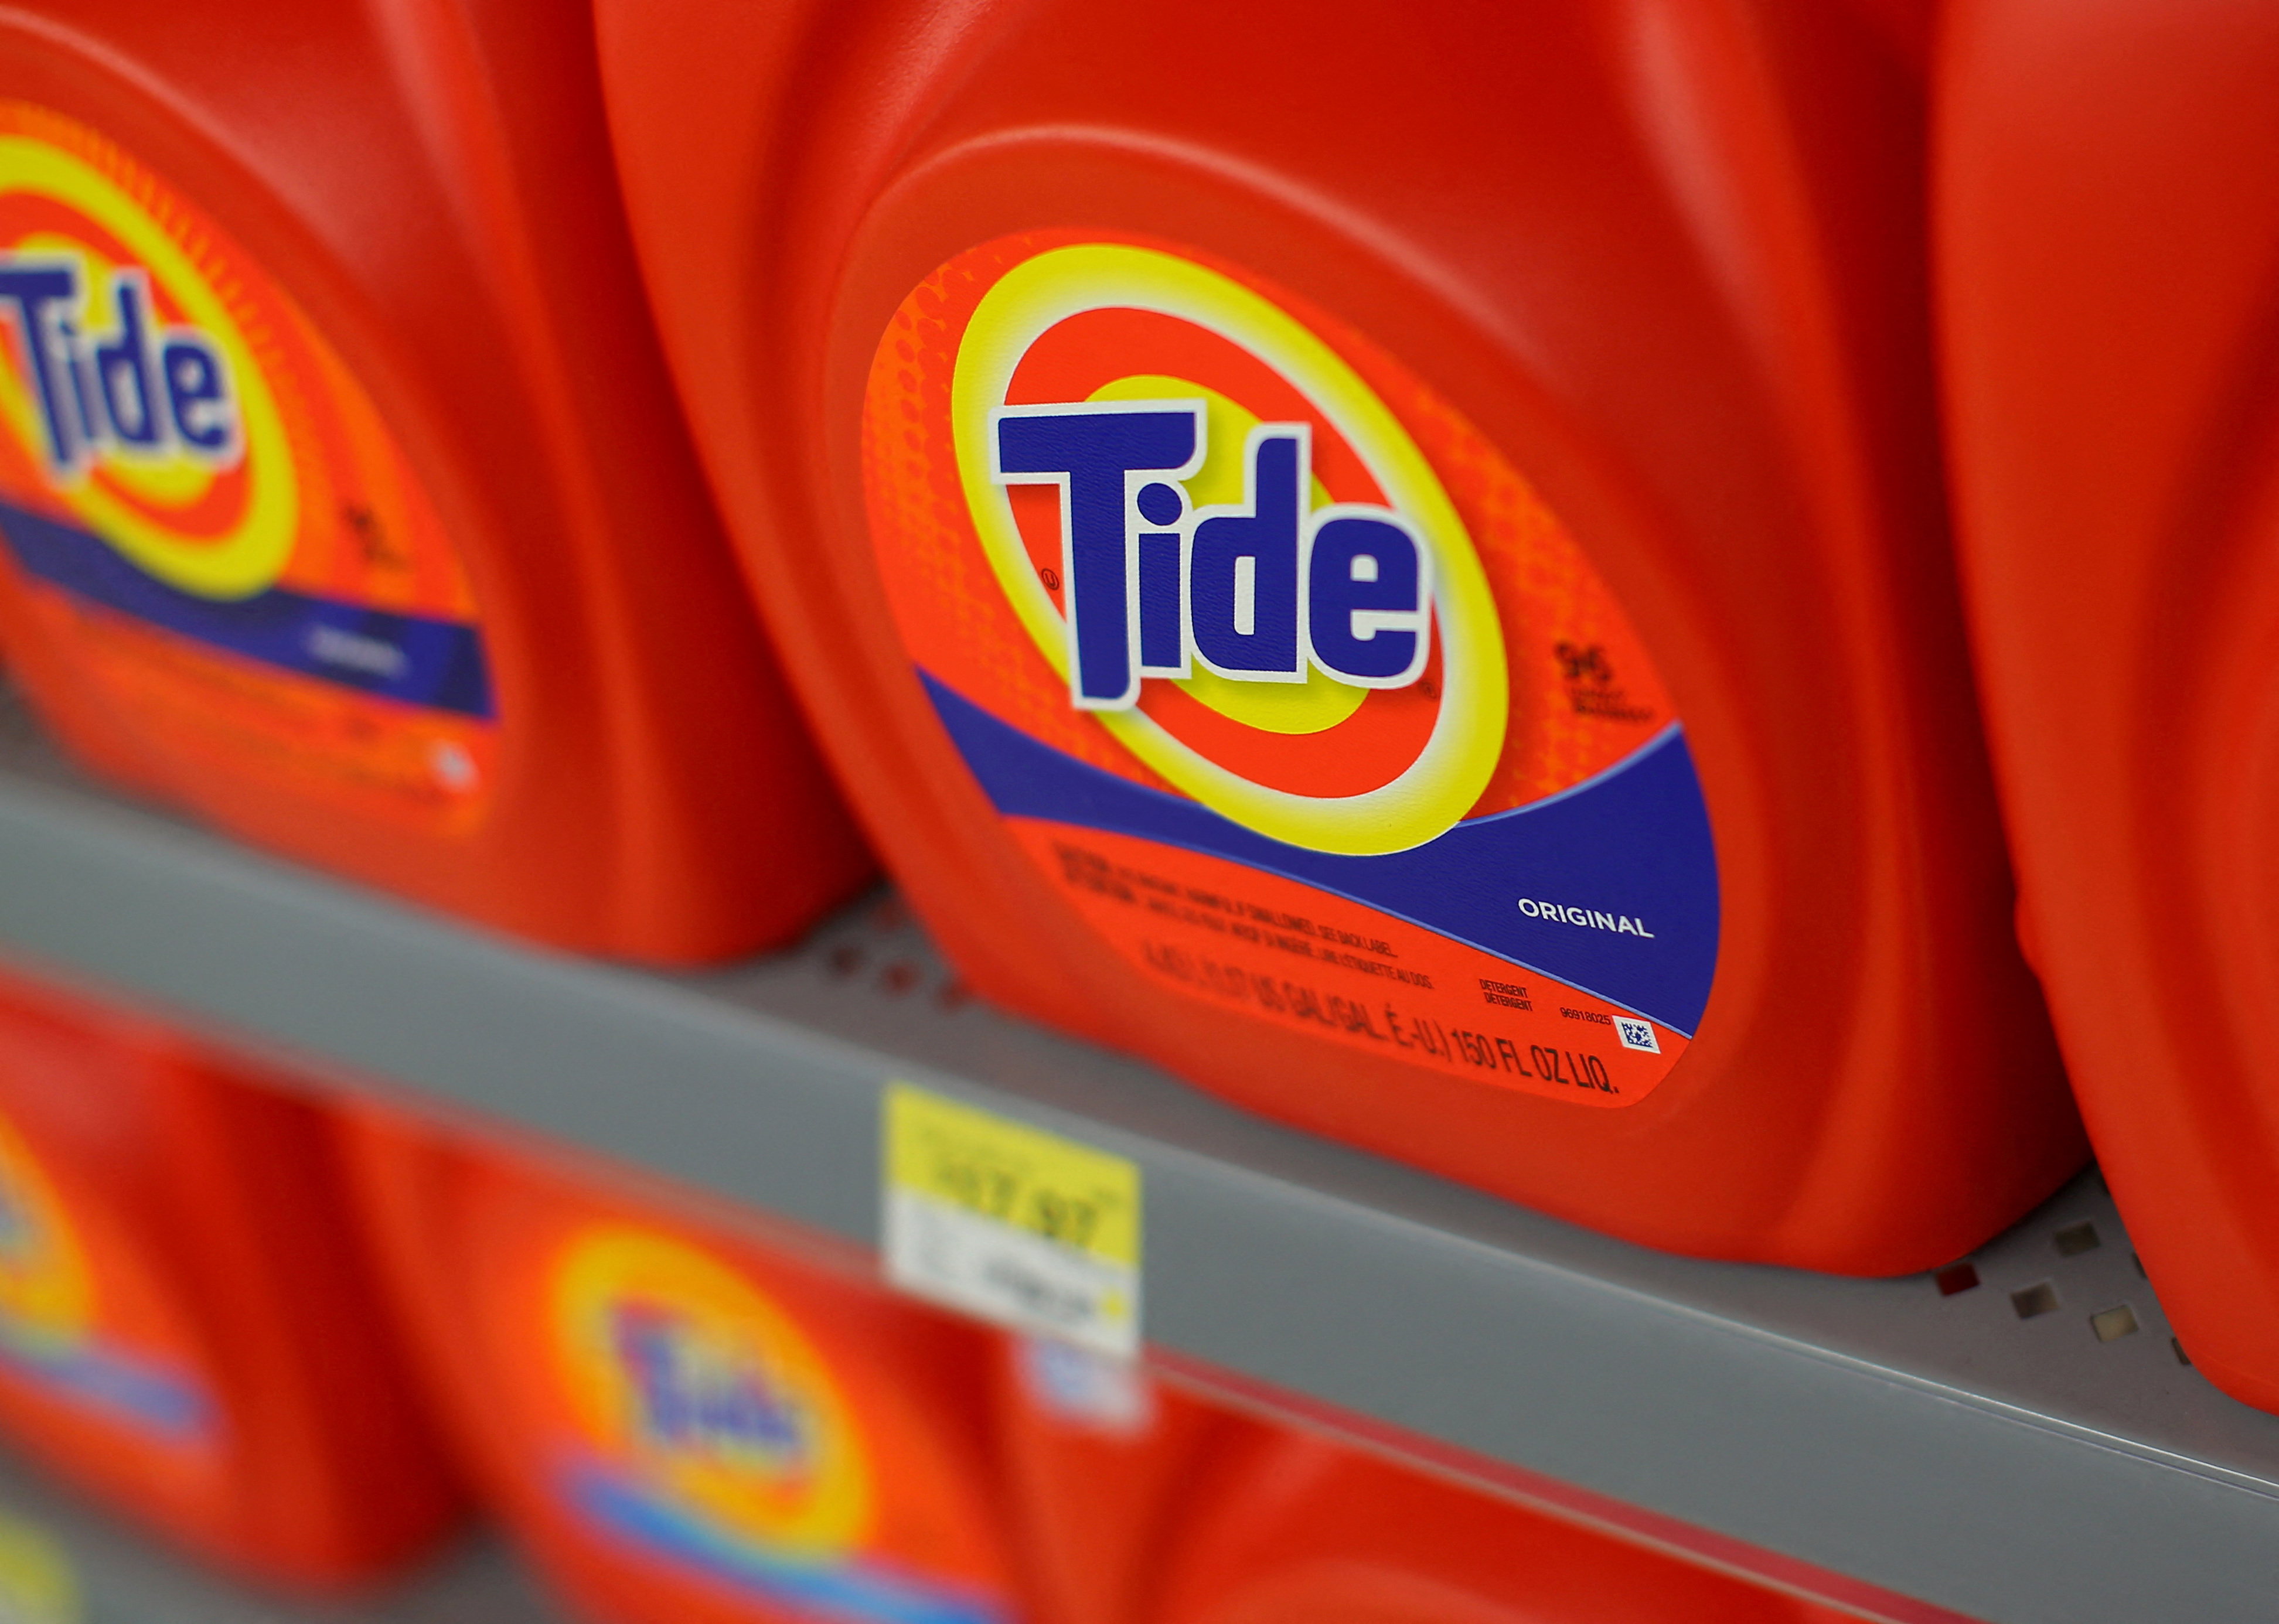 Tide laundry detergent is shown on display in Compton, California